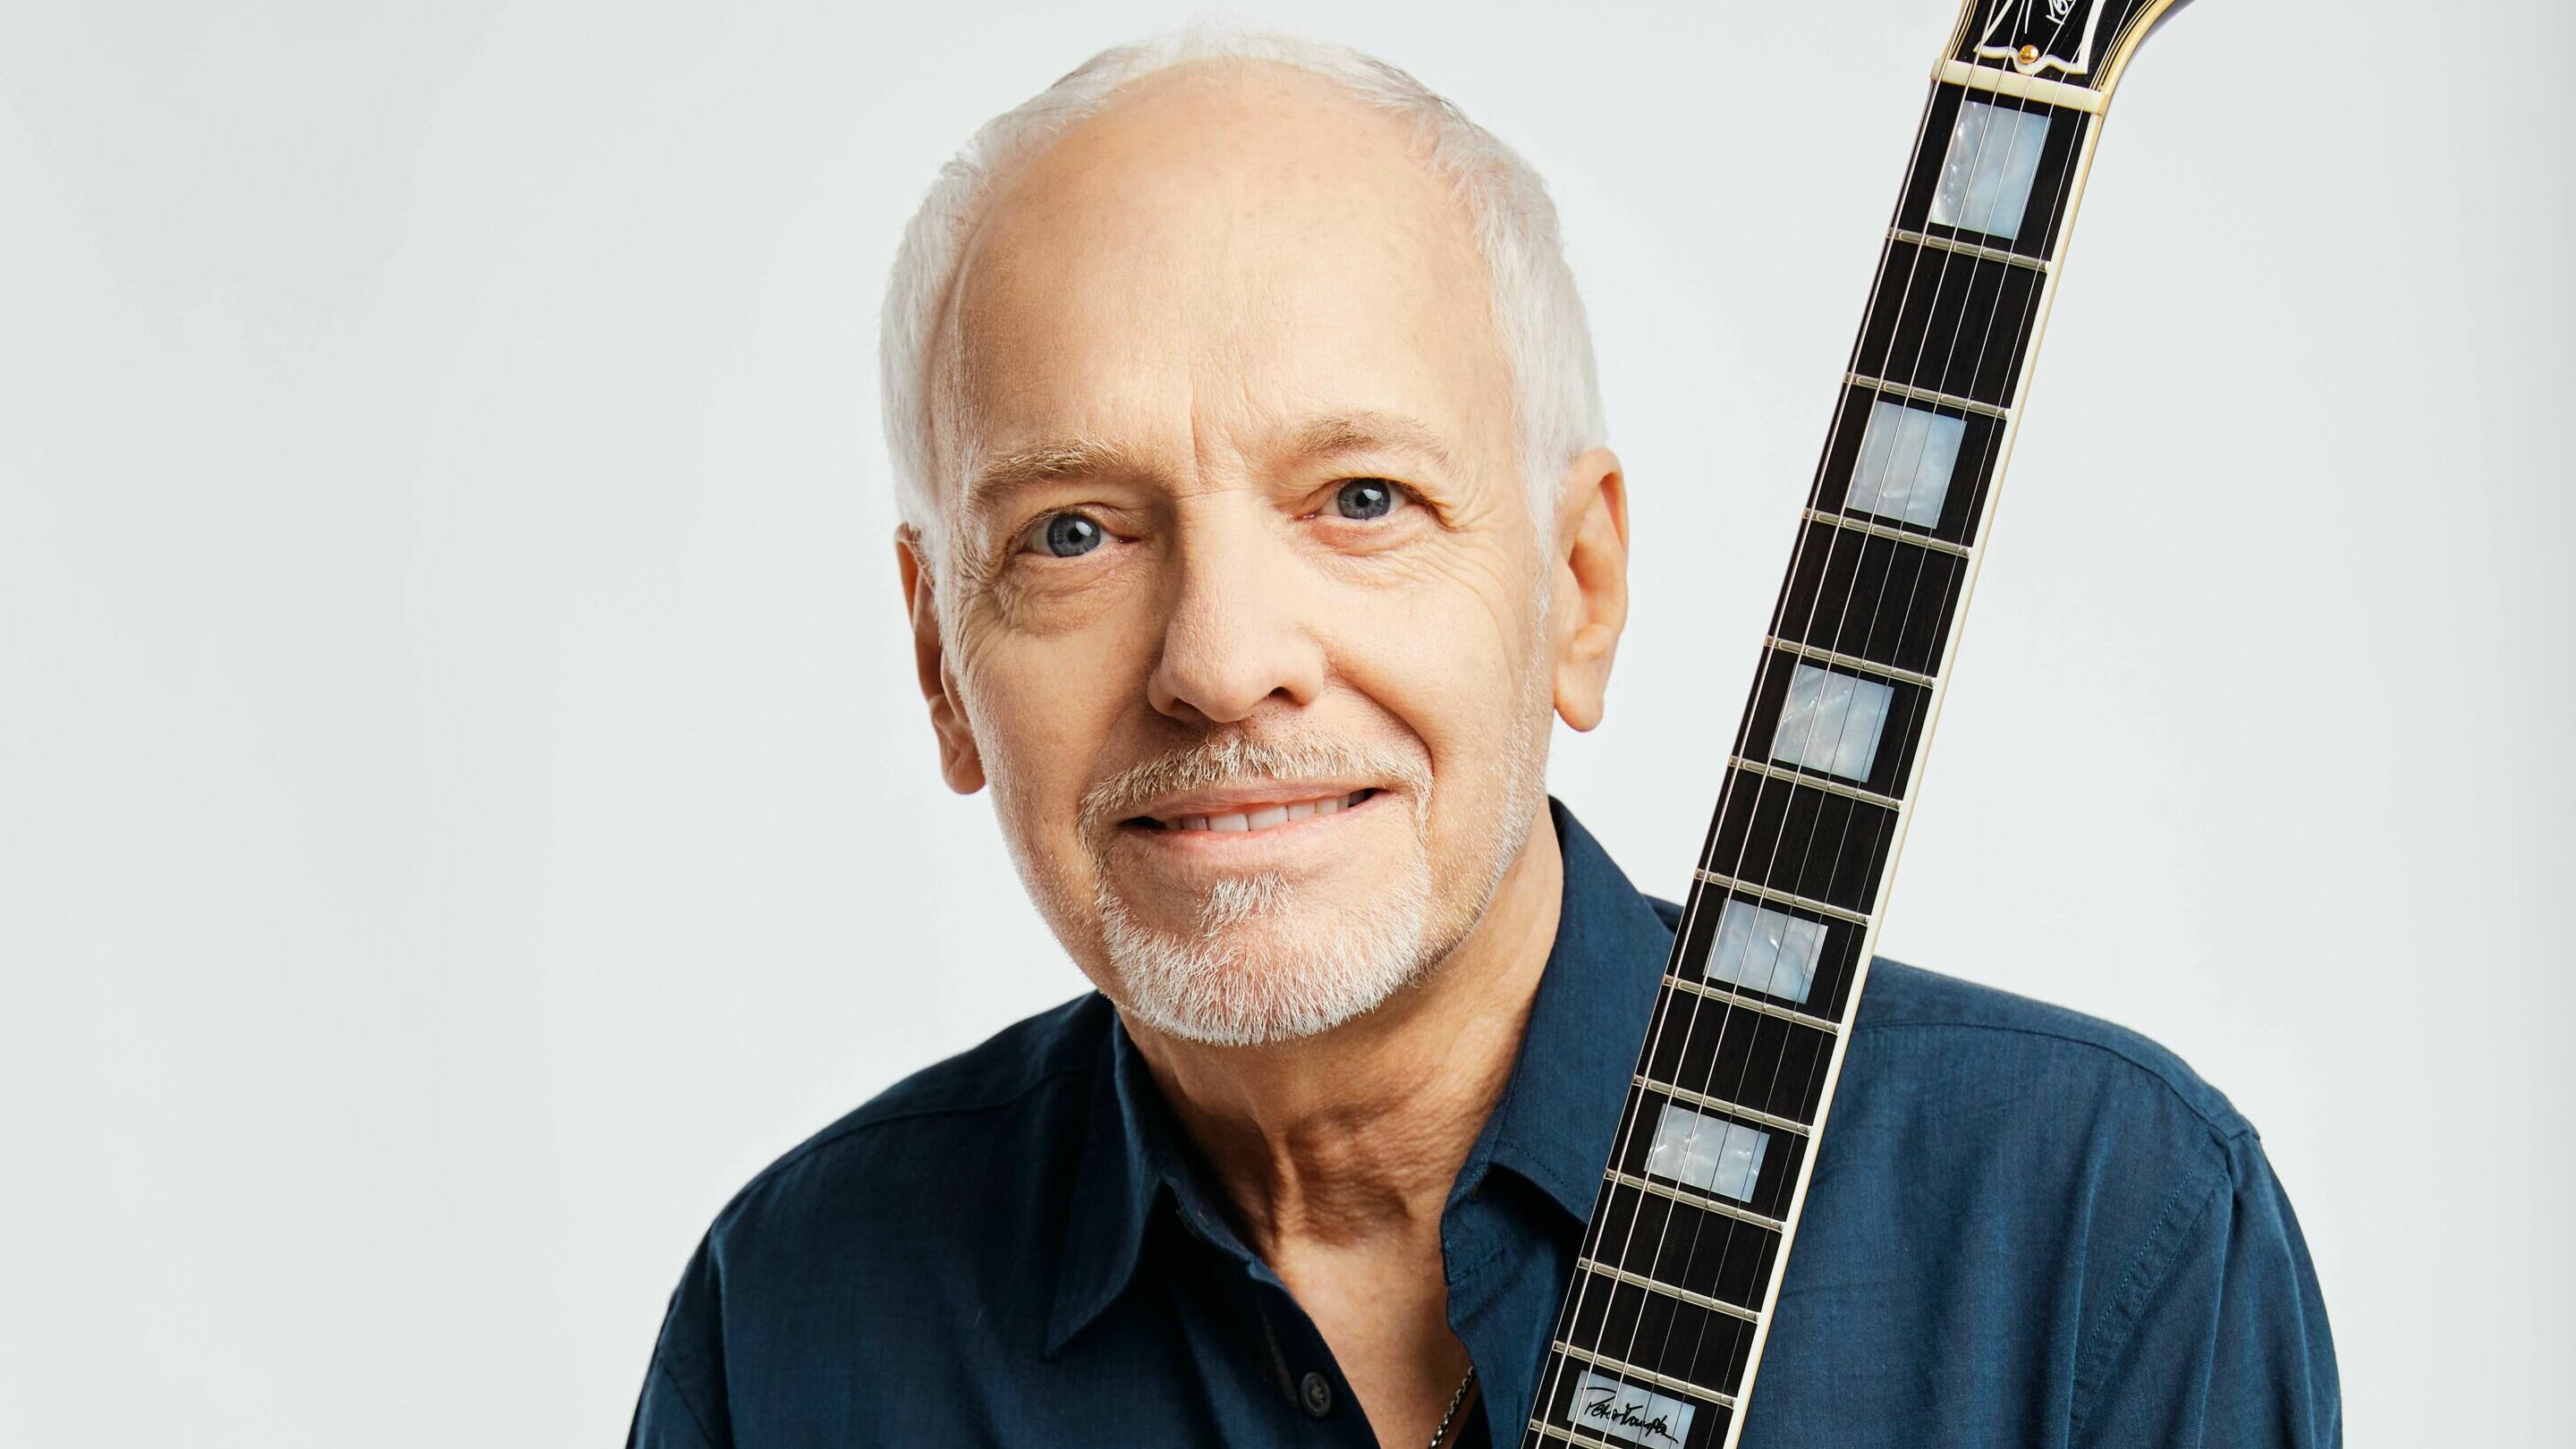 Peter Frampton music interests acquired by BMG – Music Business Worldwide